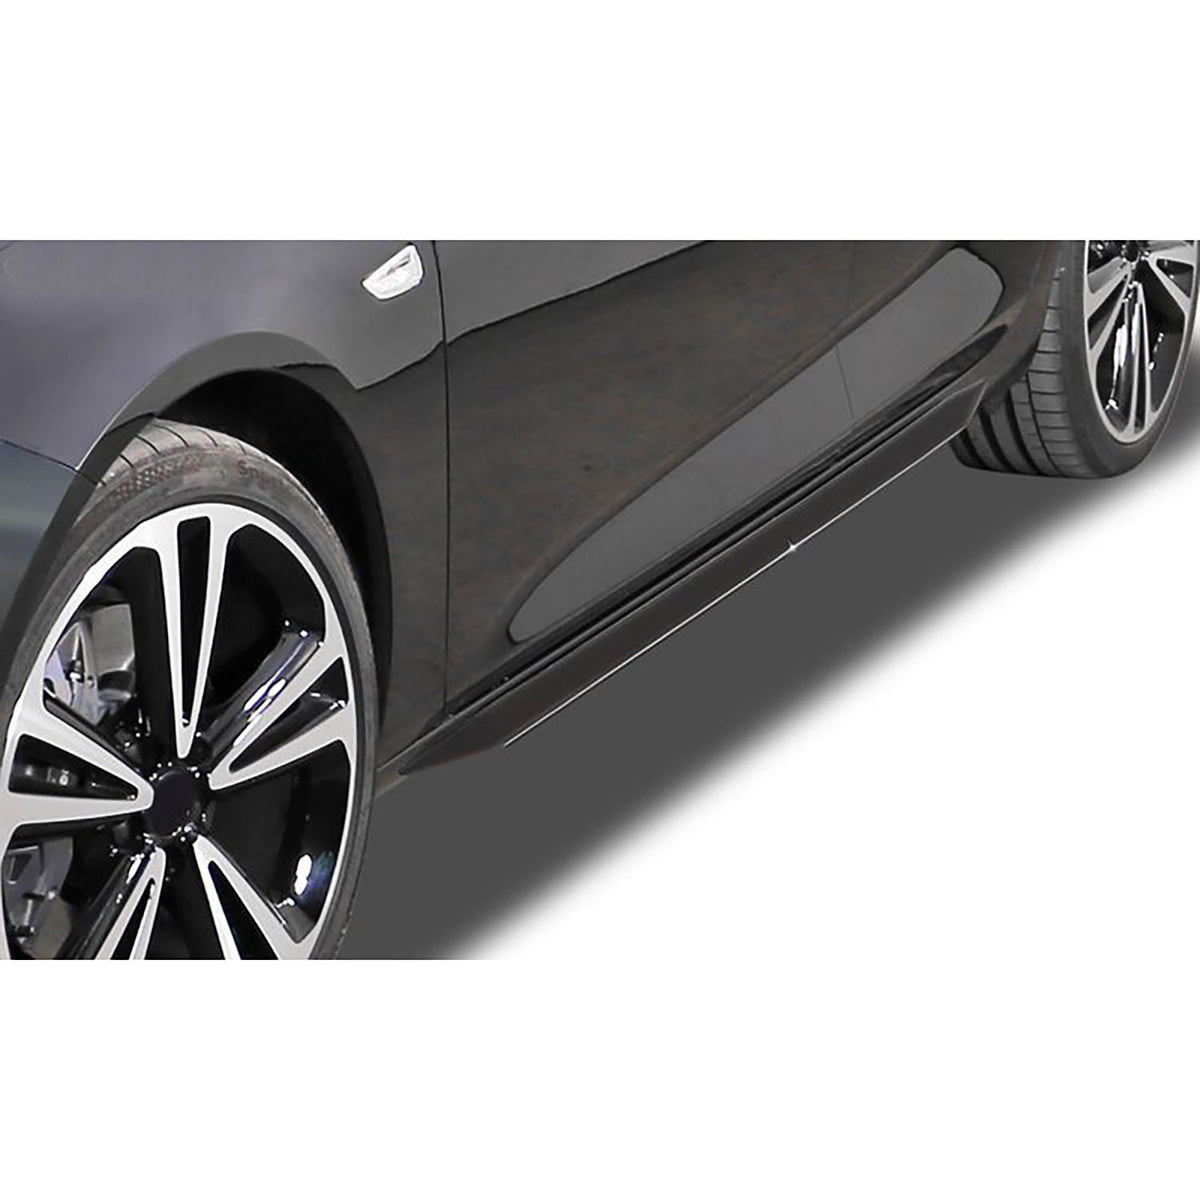 RDX side skirts for Seat Leon Toledo 1999-2004 ABS black glossy with TÜV